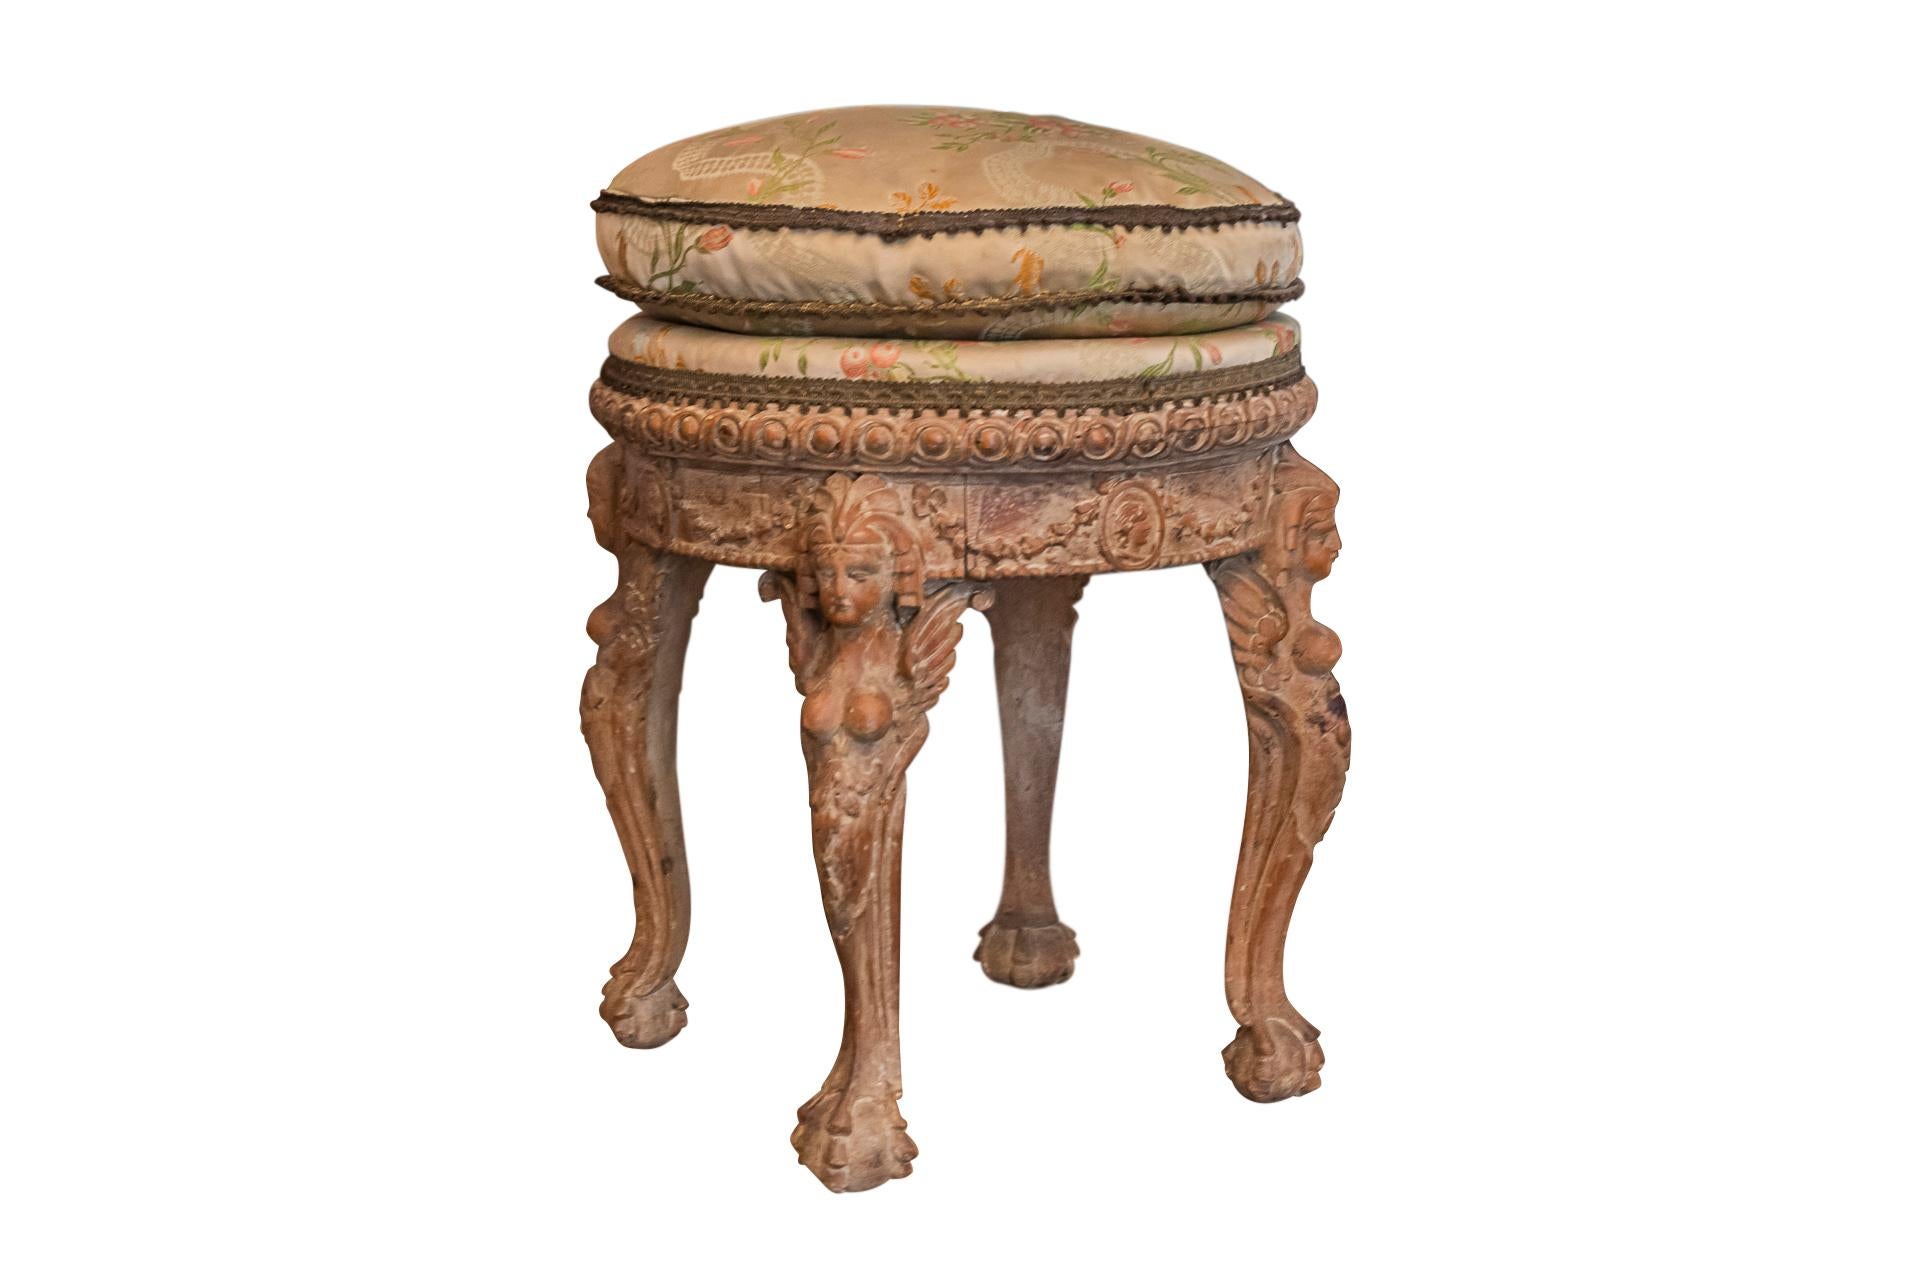 Neoclassical Pair of Round Stools, Sculpted Wood, Late 18th Century, France